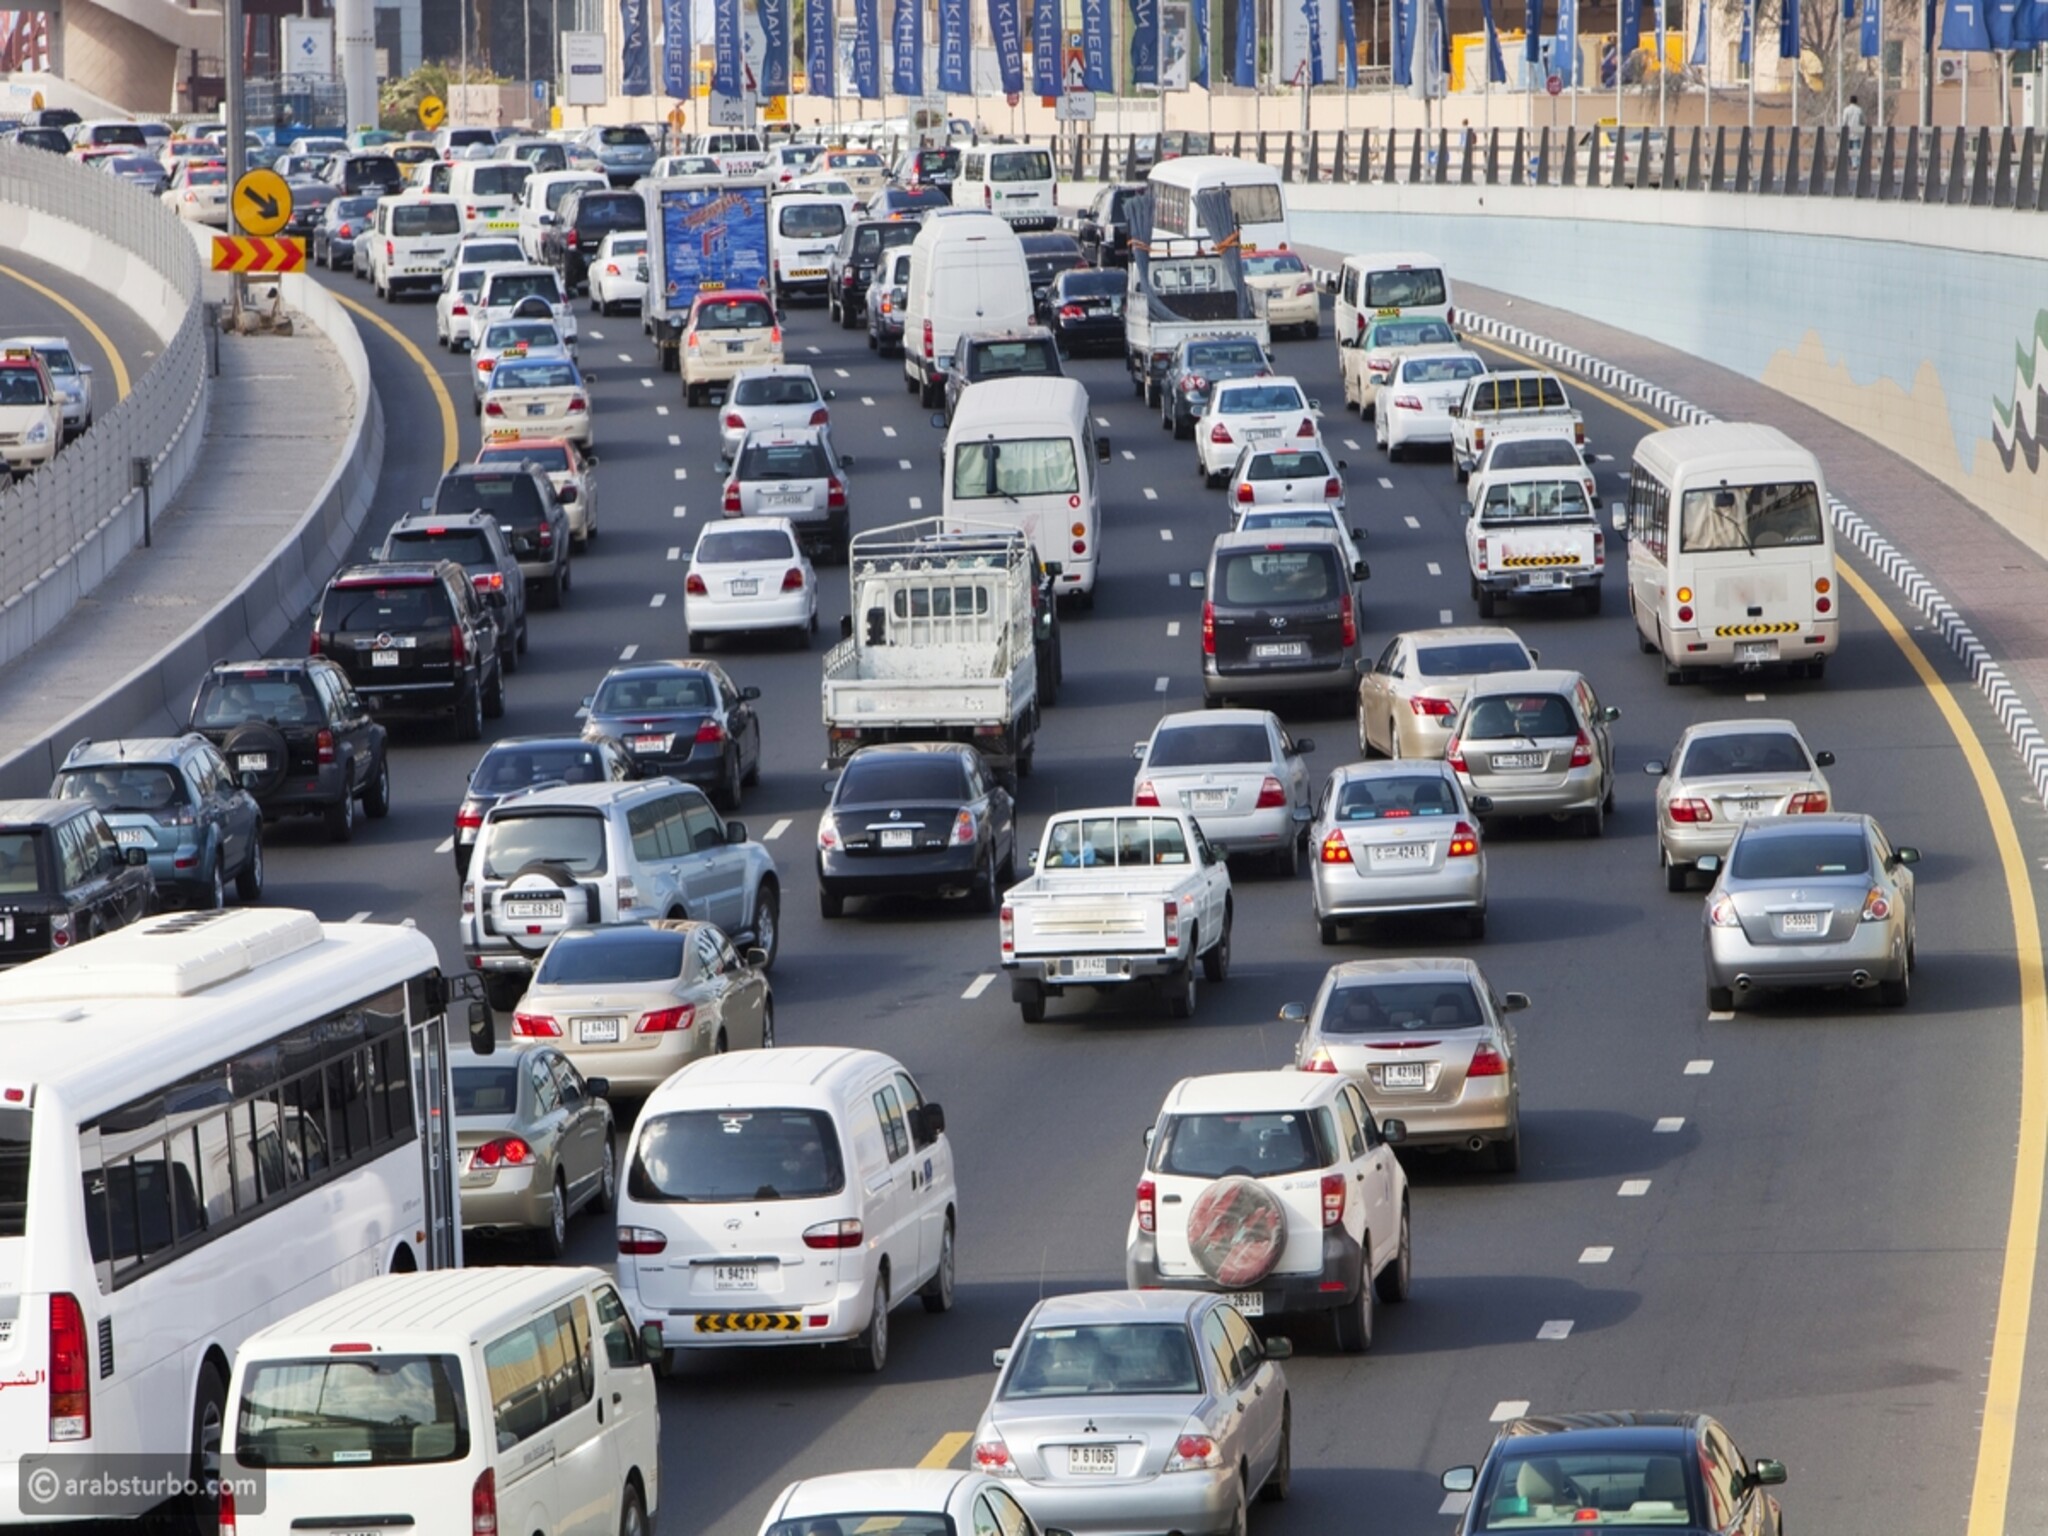 The Emirates Roads Authority issues a warning to drivers